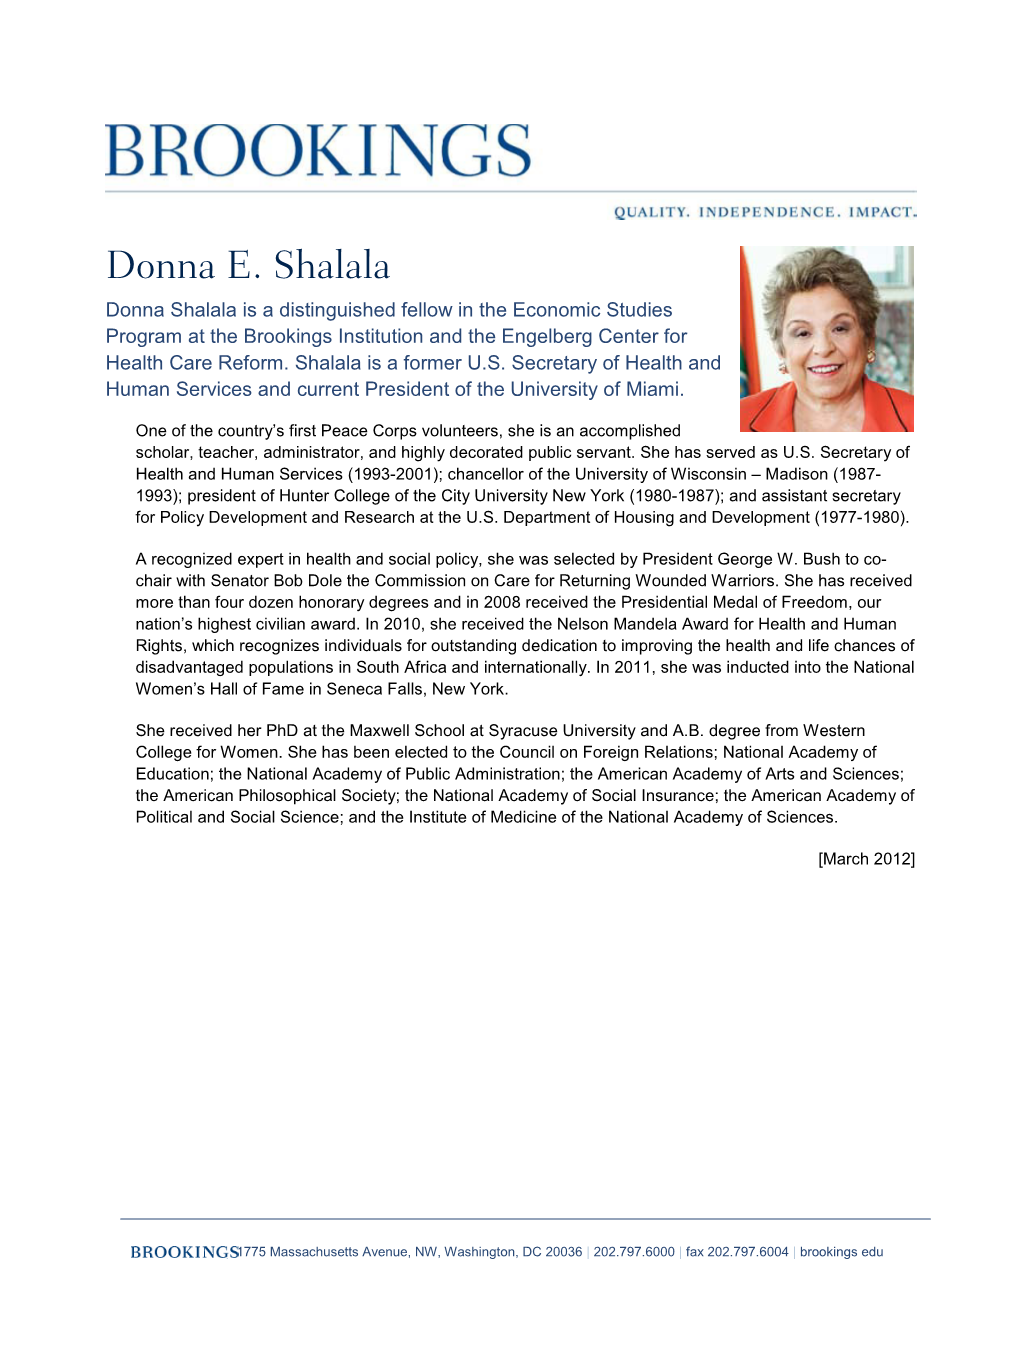 Donna E. Shalala Donna Shalala Is a Distinguished Fellow in the Economic Studies Program at the Brookings Institution and the Engelberg Center for Health Care Reform